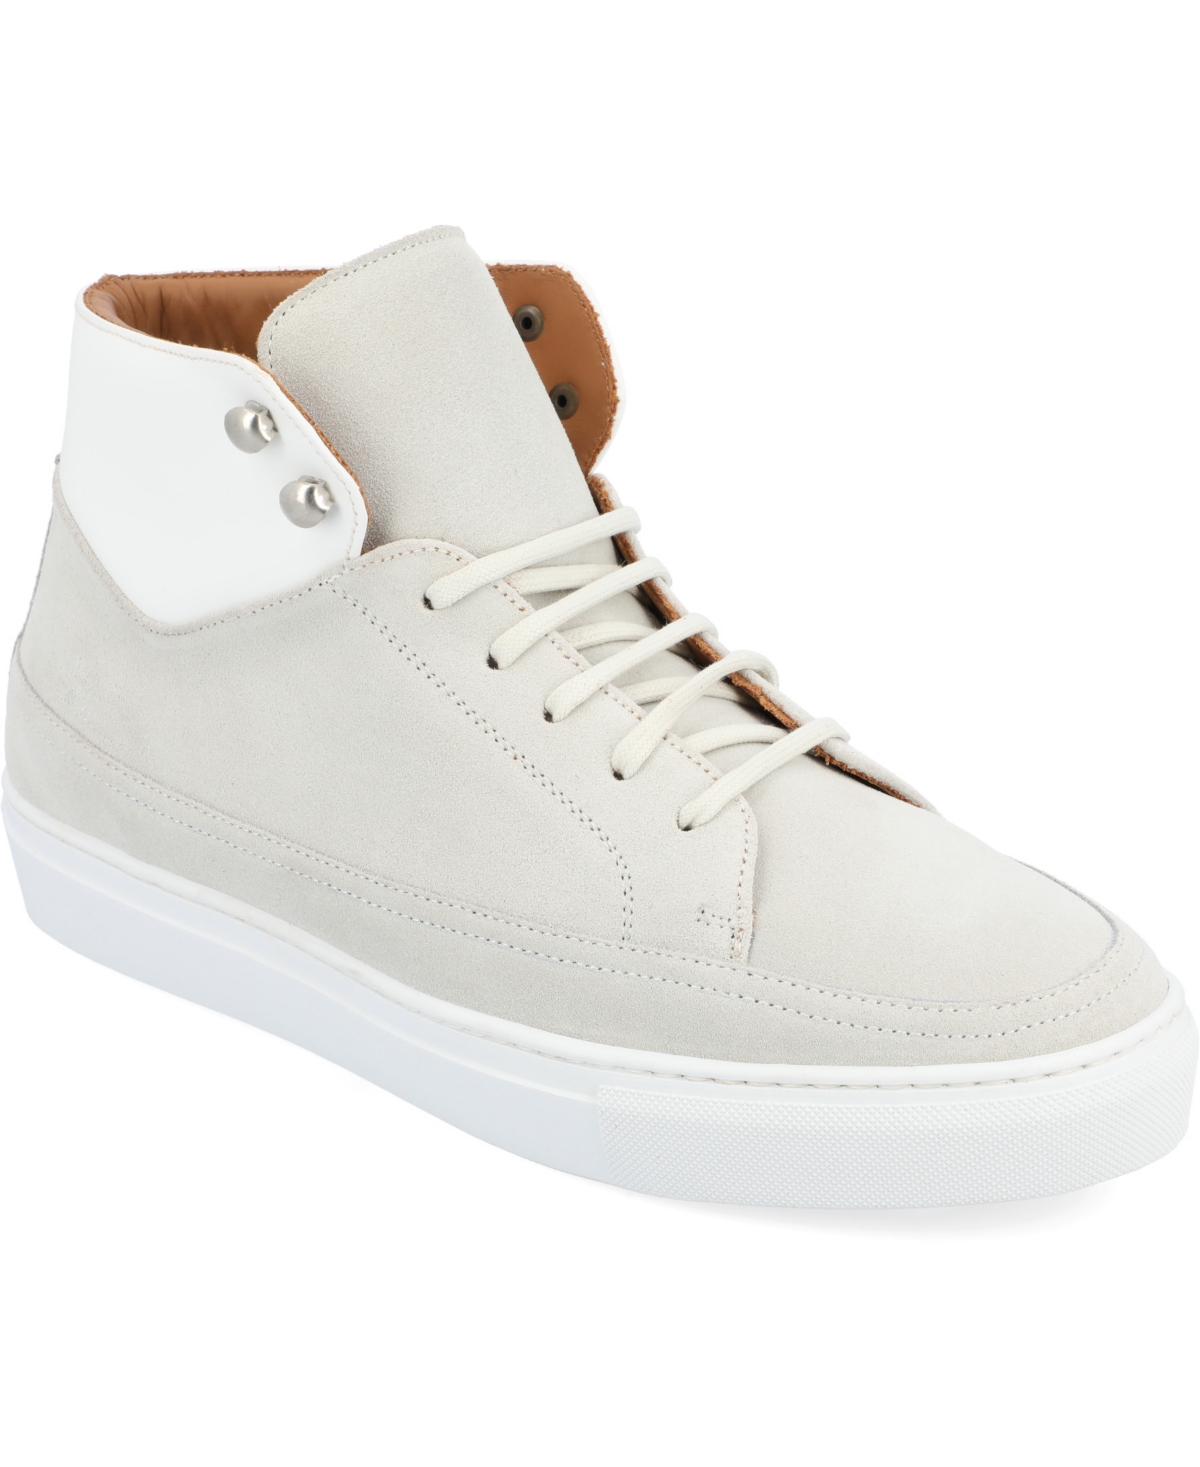 Men's Fifth Ave High Top Leather Handcrafted Lace-up Sneaker - Cream